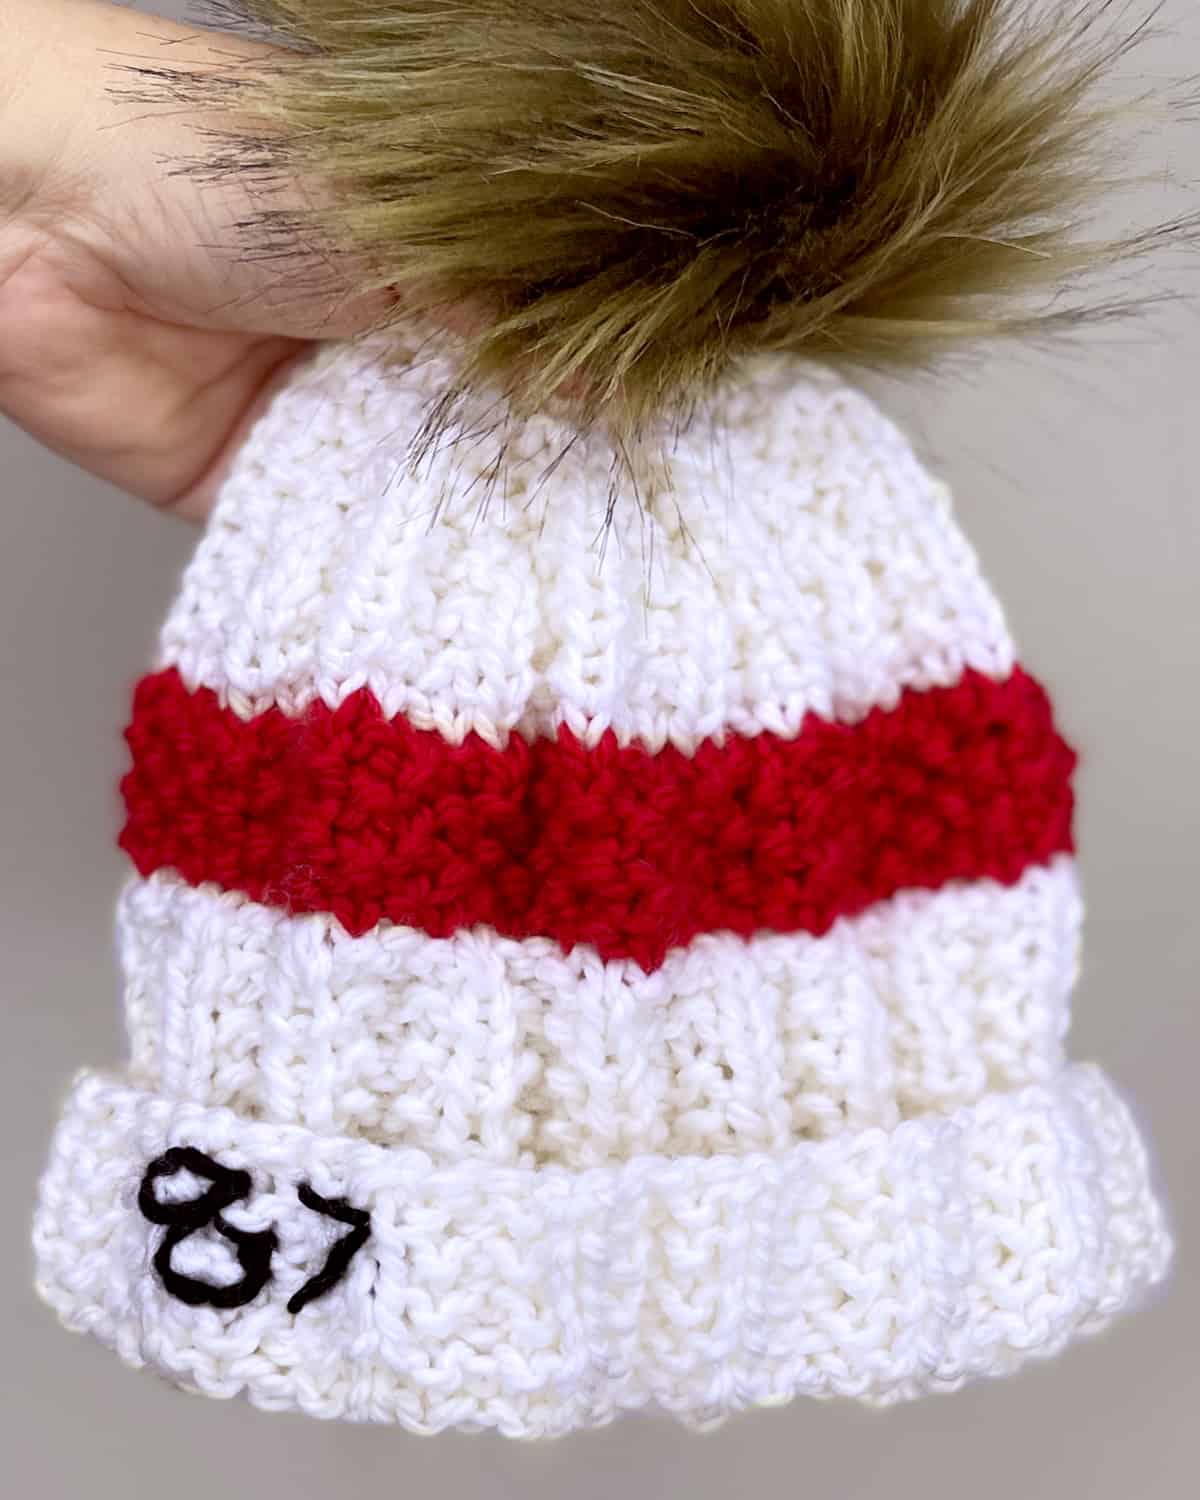 White and red knitted Taylor Swift's 87 Beanie Hat held by a hand.